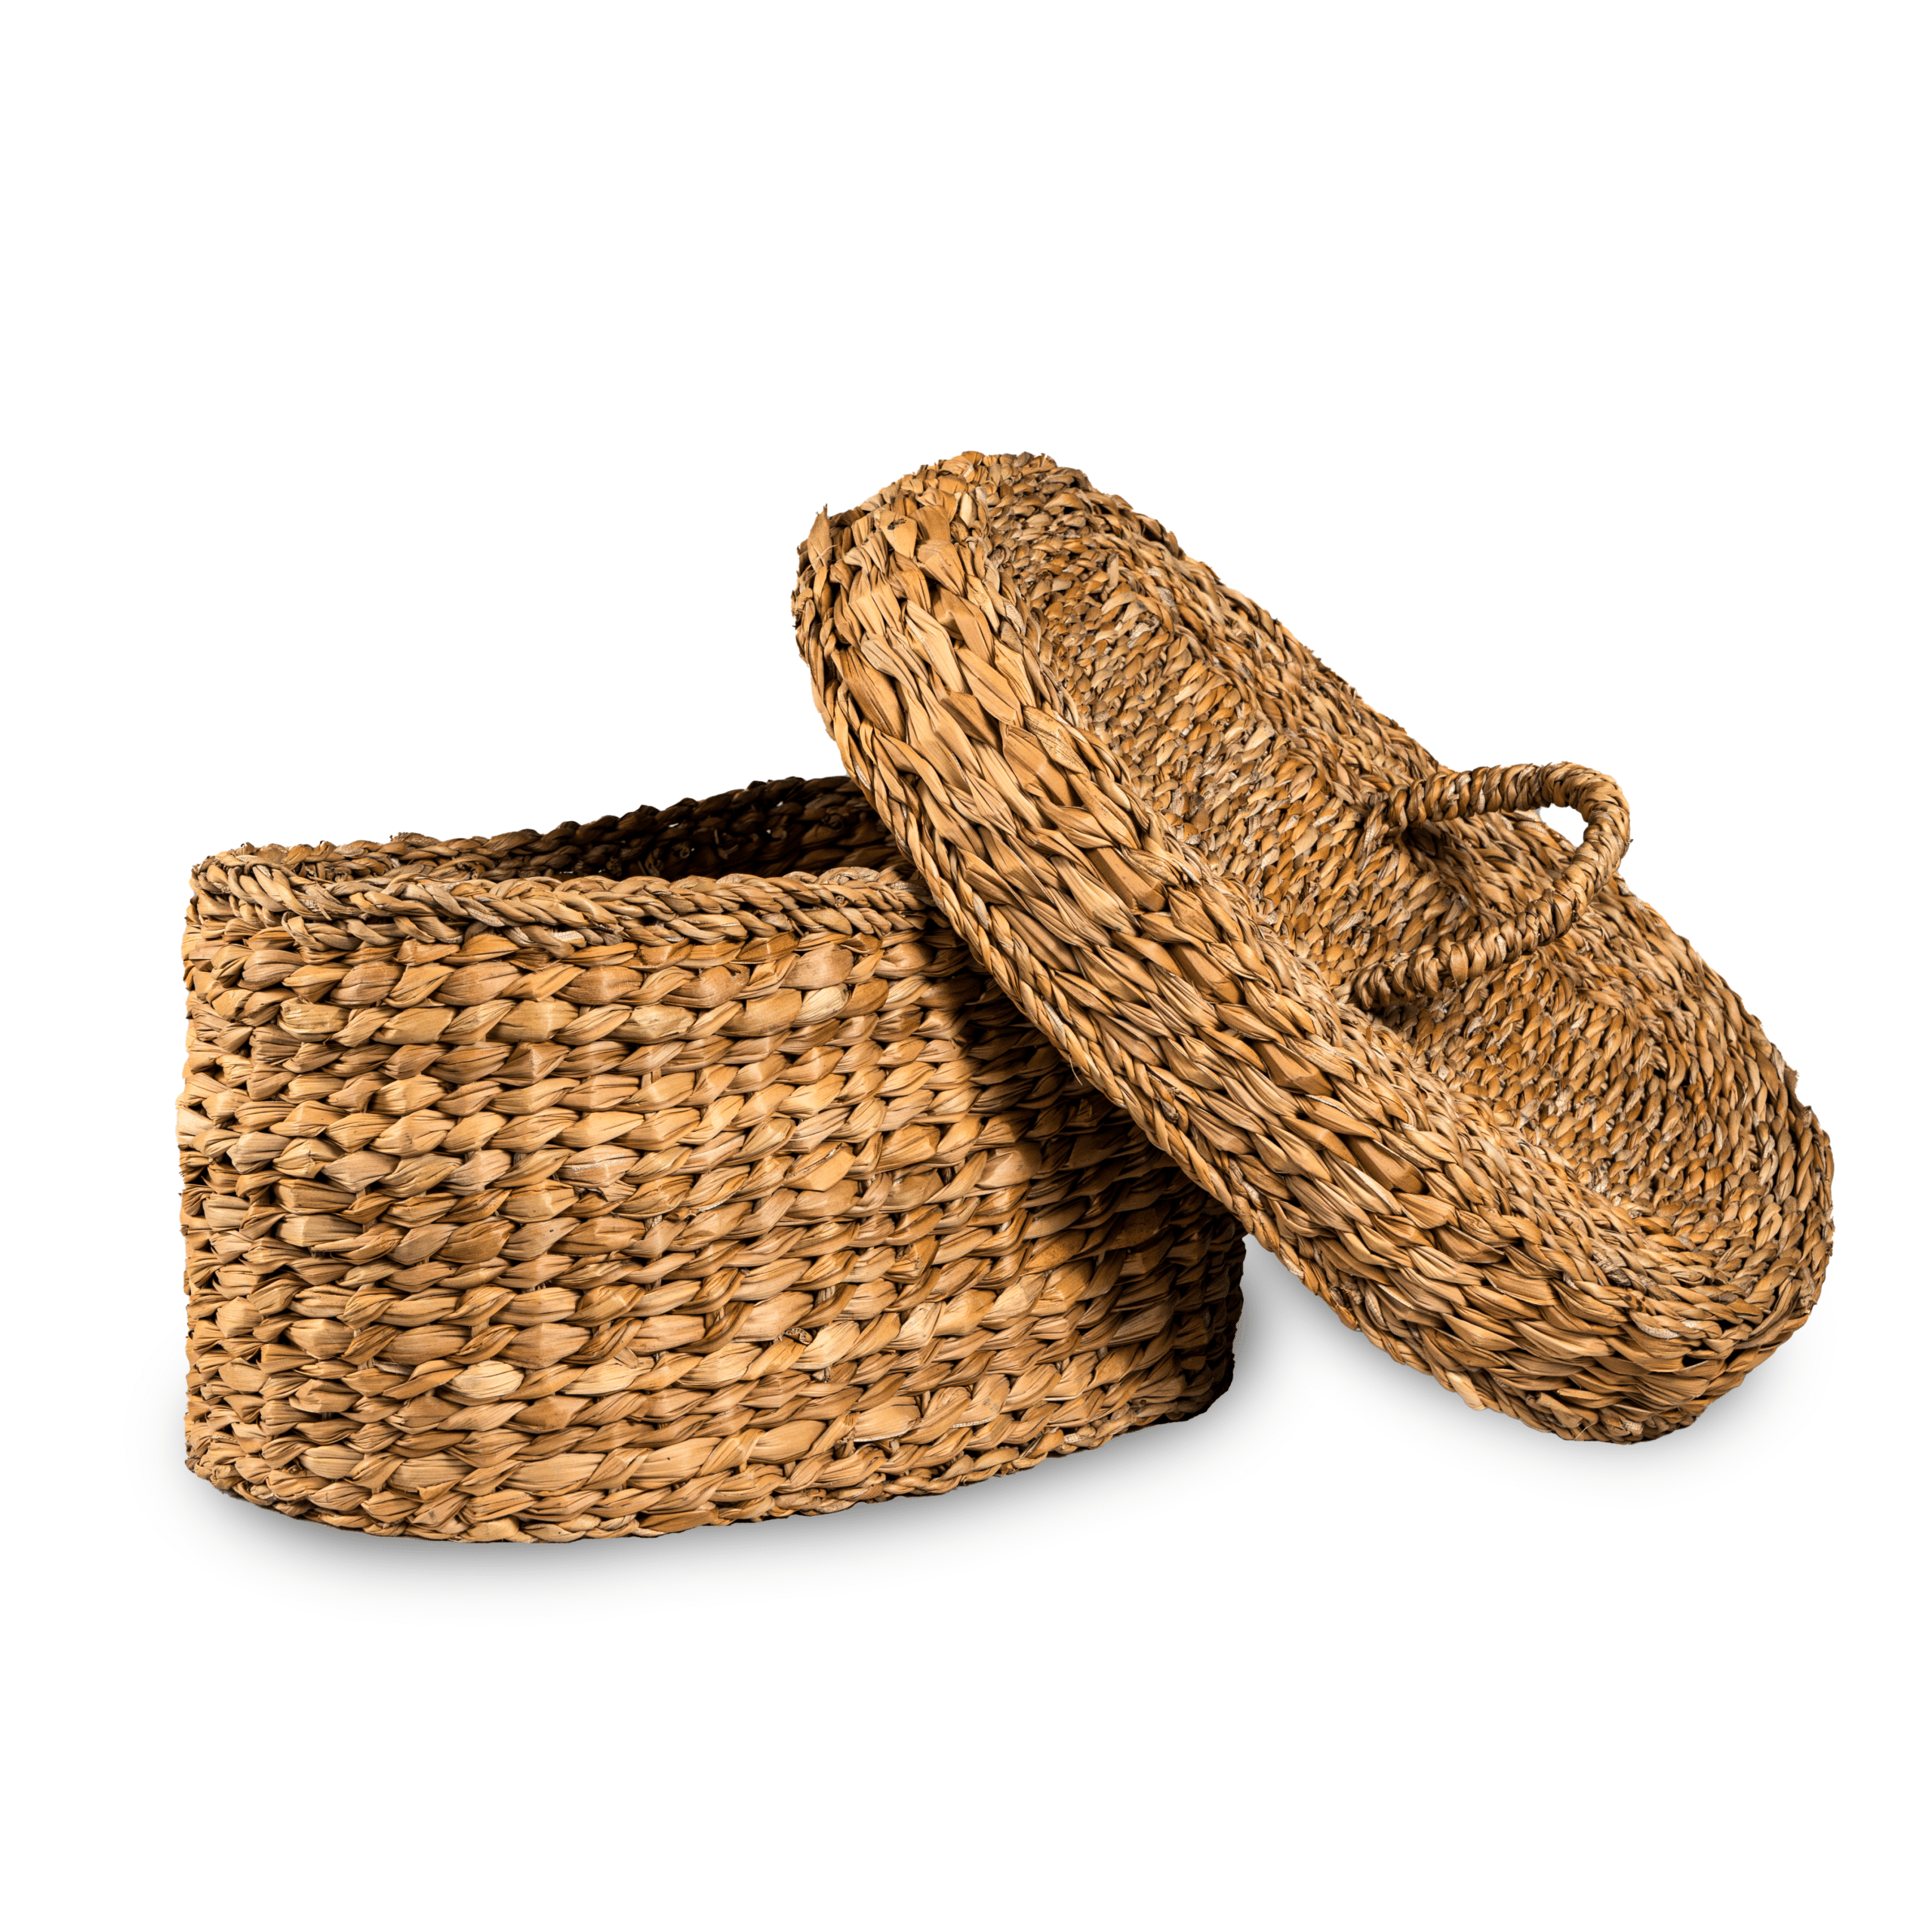 Seagrass Tiffin Picnic Basket with Lid - ICSGHFB5 (2)